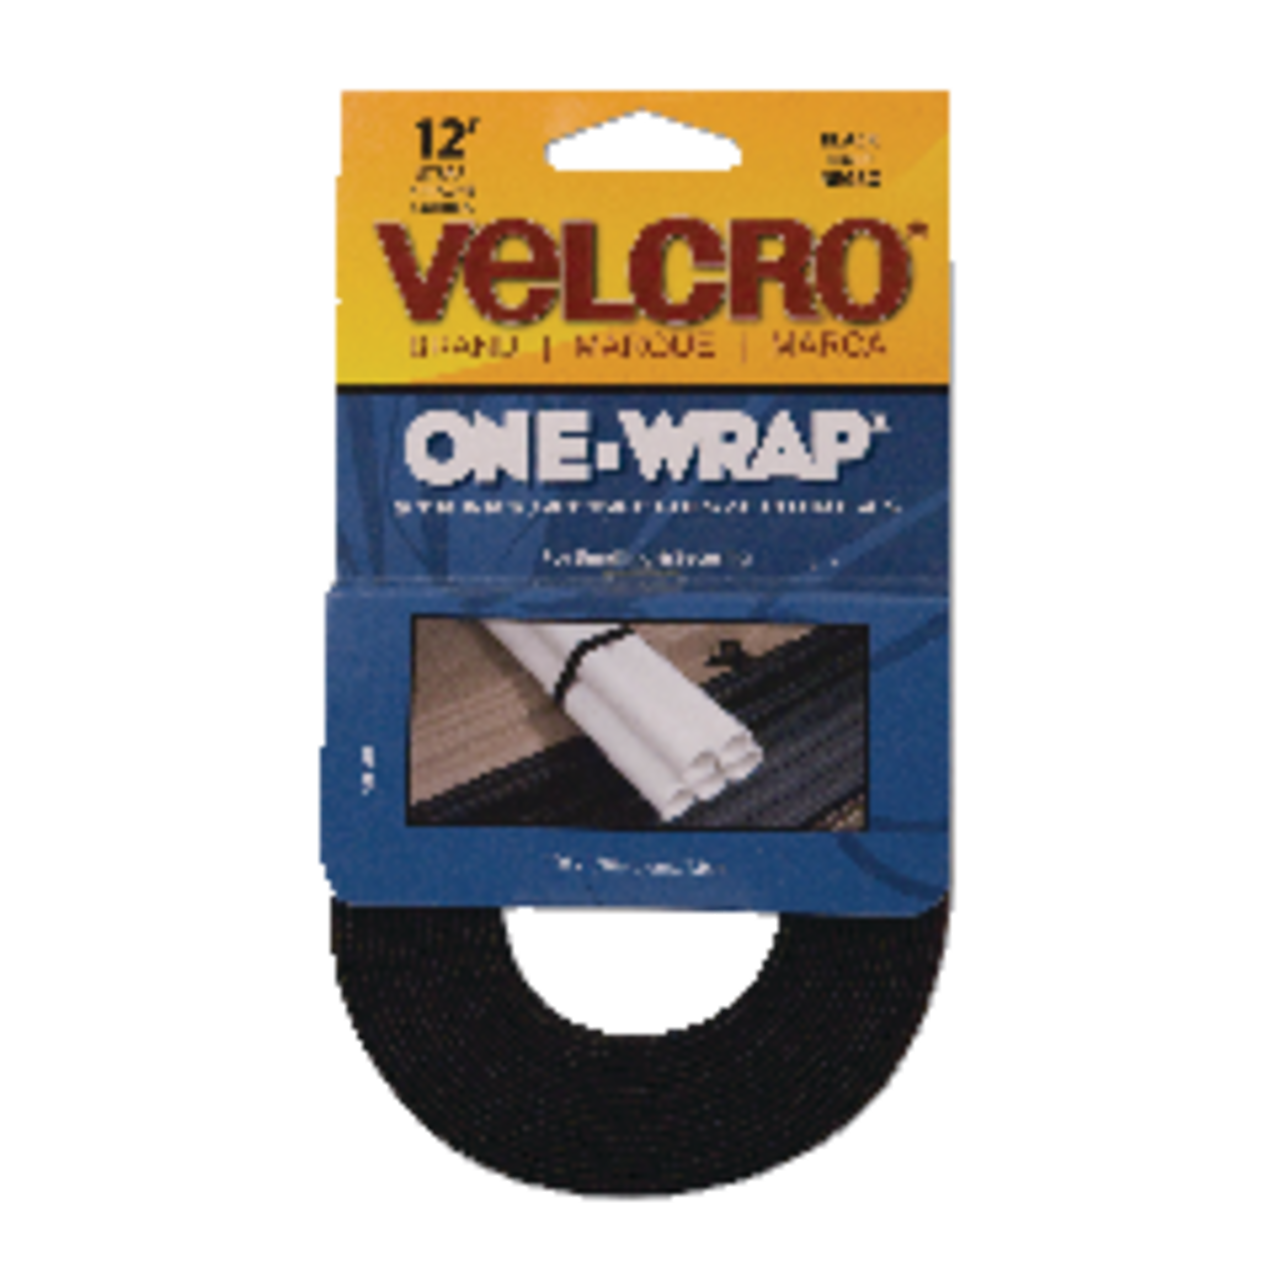 https://media-www.canadiantire.ca/product/fixing/hardware/general-hardware/0618425/velcro-3-4-x-12-black-wrap-77b56a63-f483-474d-8e4a-95349b9d2fff.png?imdensity=1&imwidth=640&impolicy=mZoom